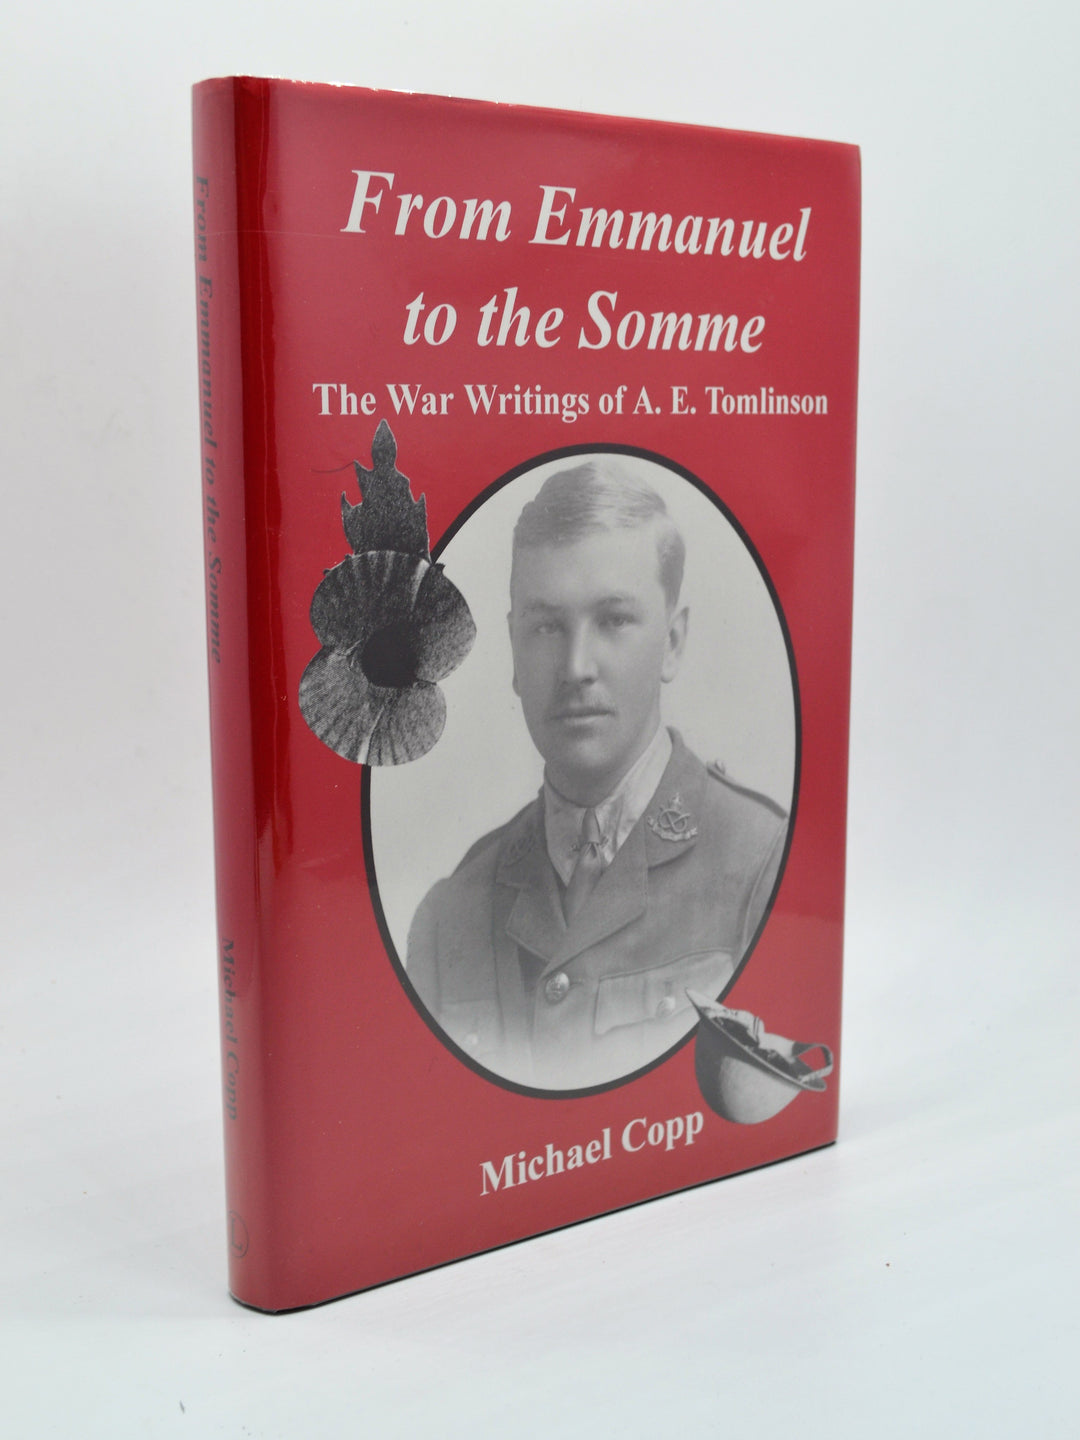 Copp, Michael - From Emmanuel to the Somme | back cover